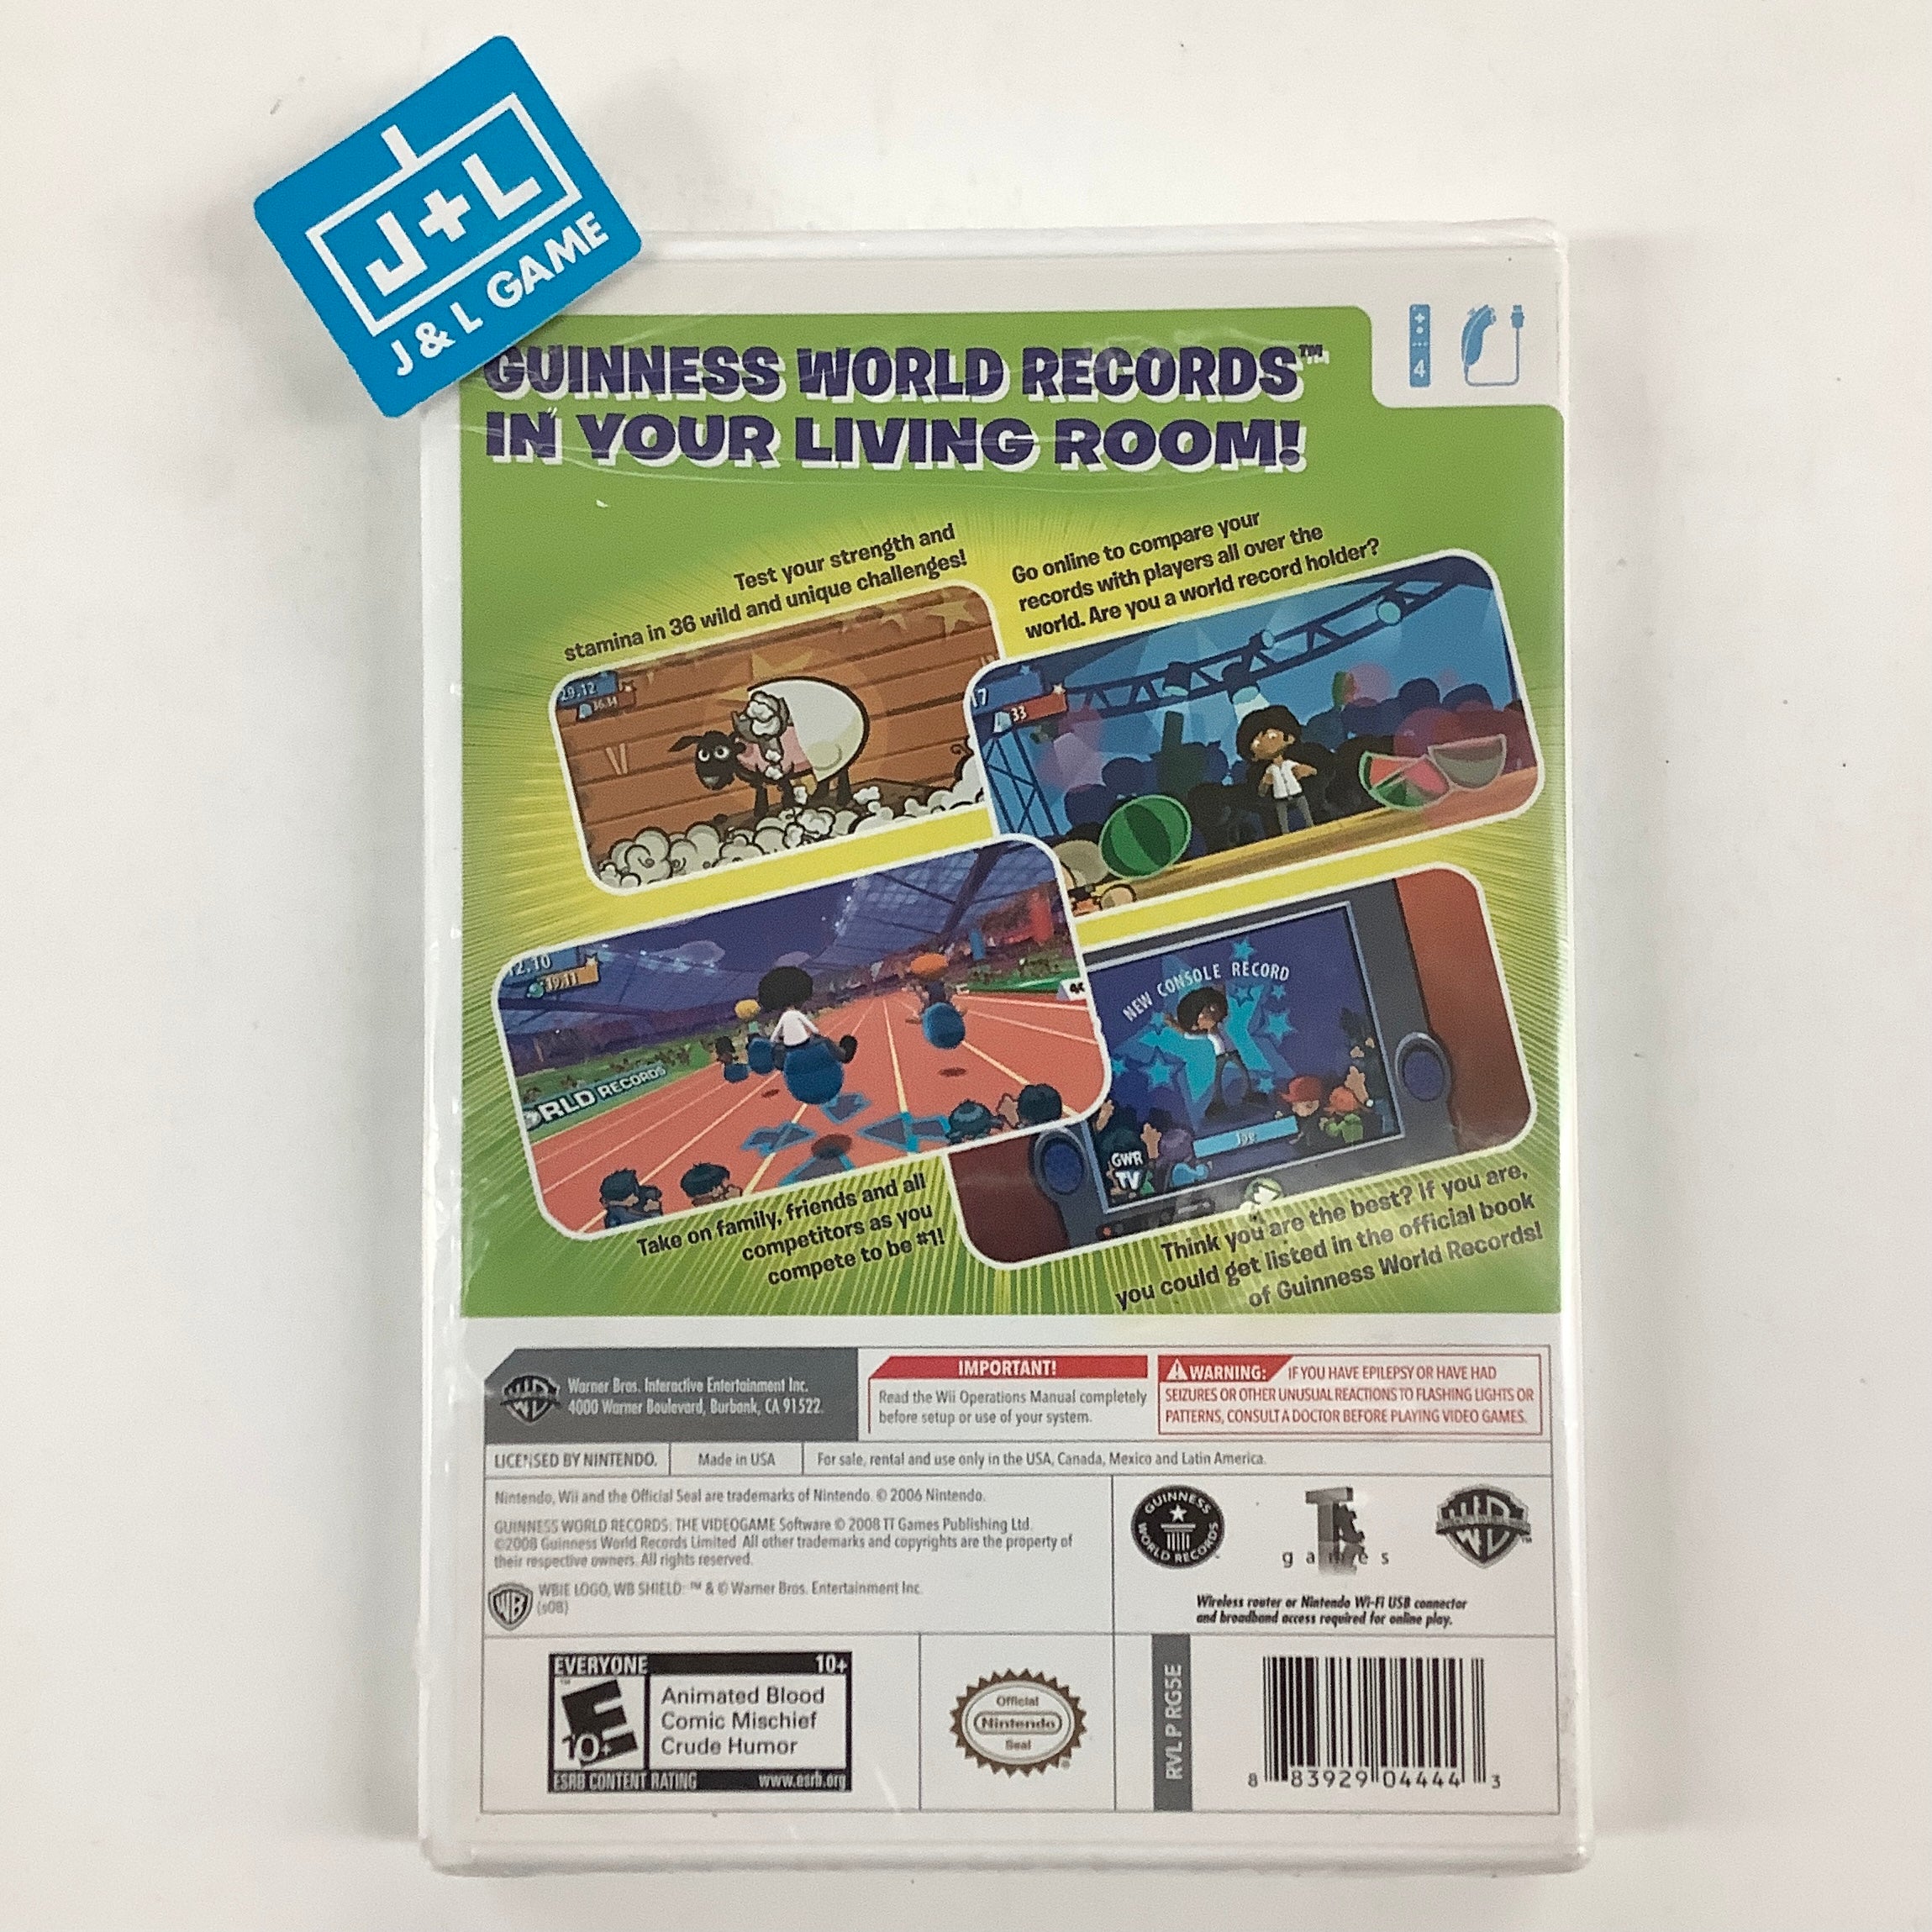 Guinness World Records: The Videogame - Nintendo Wii Video Games Warner Bros. Interactive Entertainment   